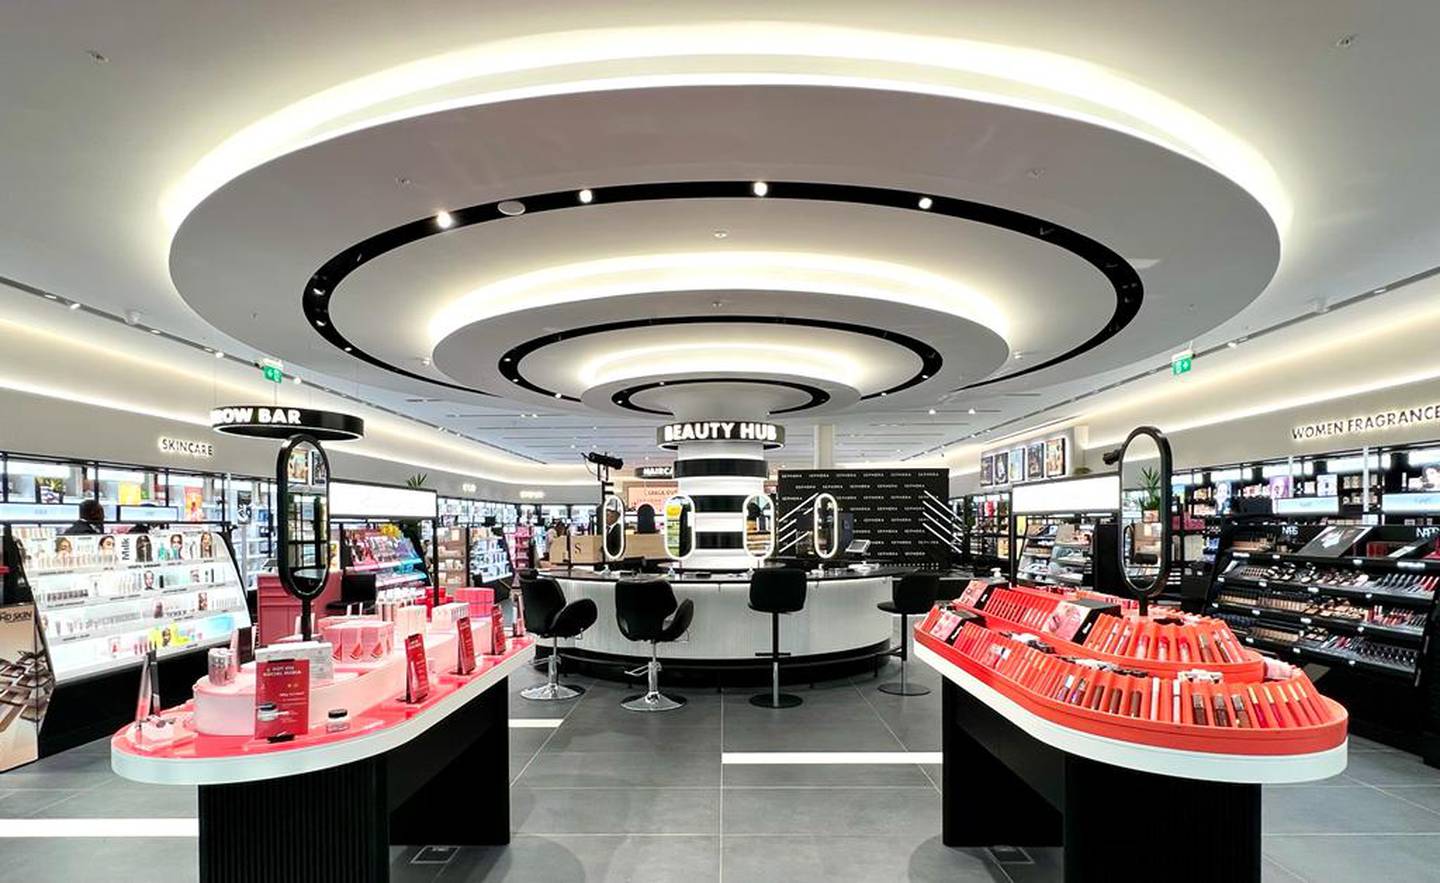 Inside the new Sephora store in London.